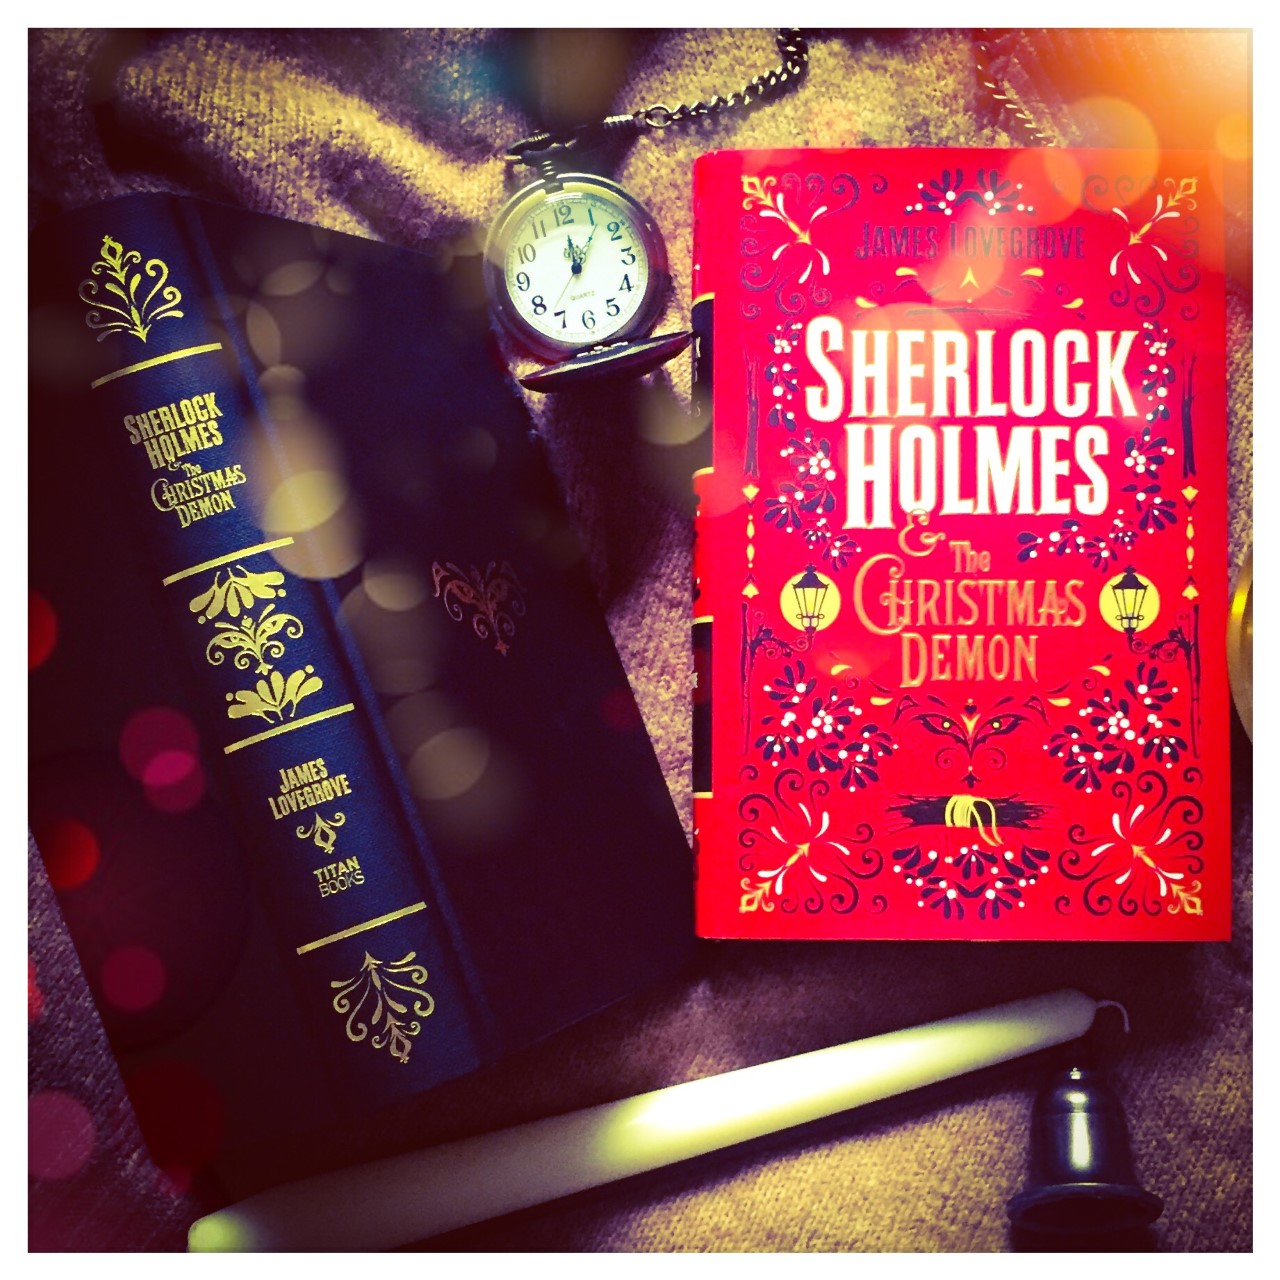 Download Mini Review Of Sherlock Holmes And The Christmas Demon By James Lovegrove With Thanks To Titan Books Books Tea And Me SVG Cut Files